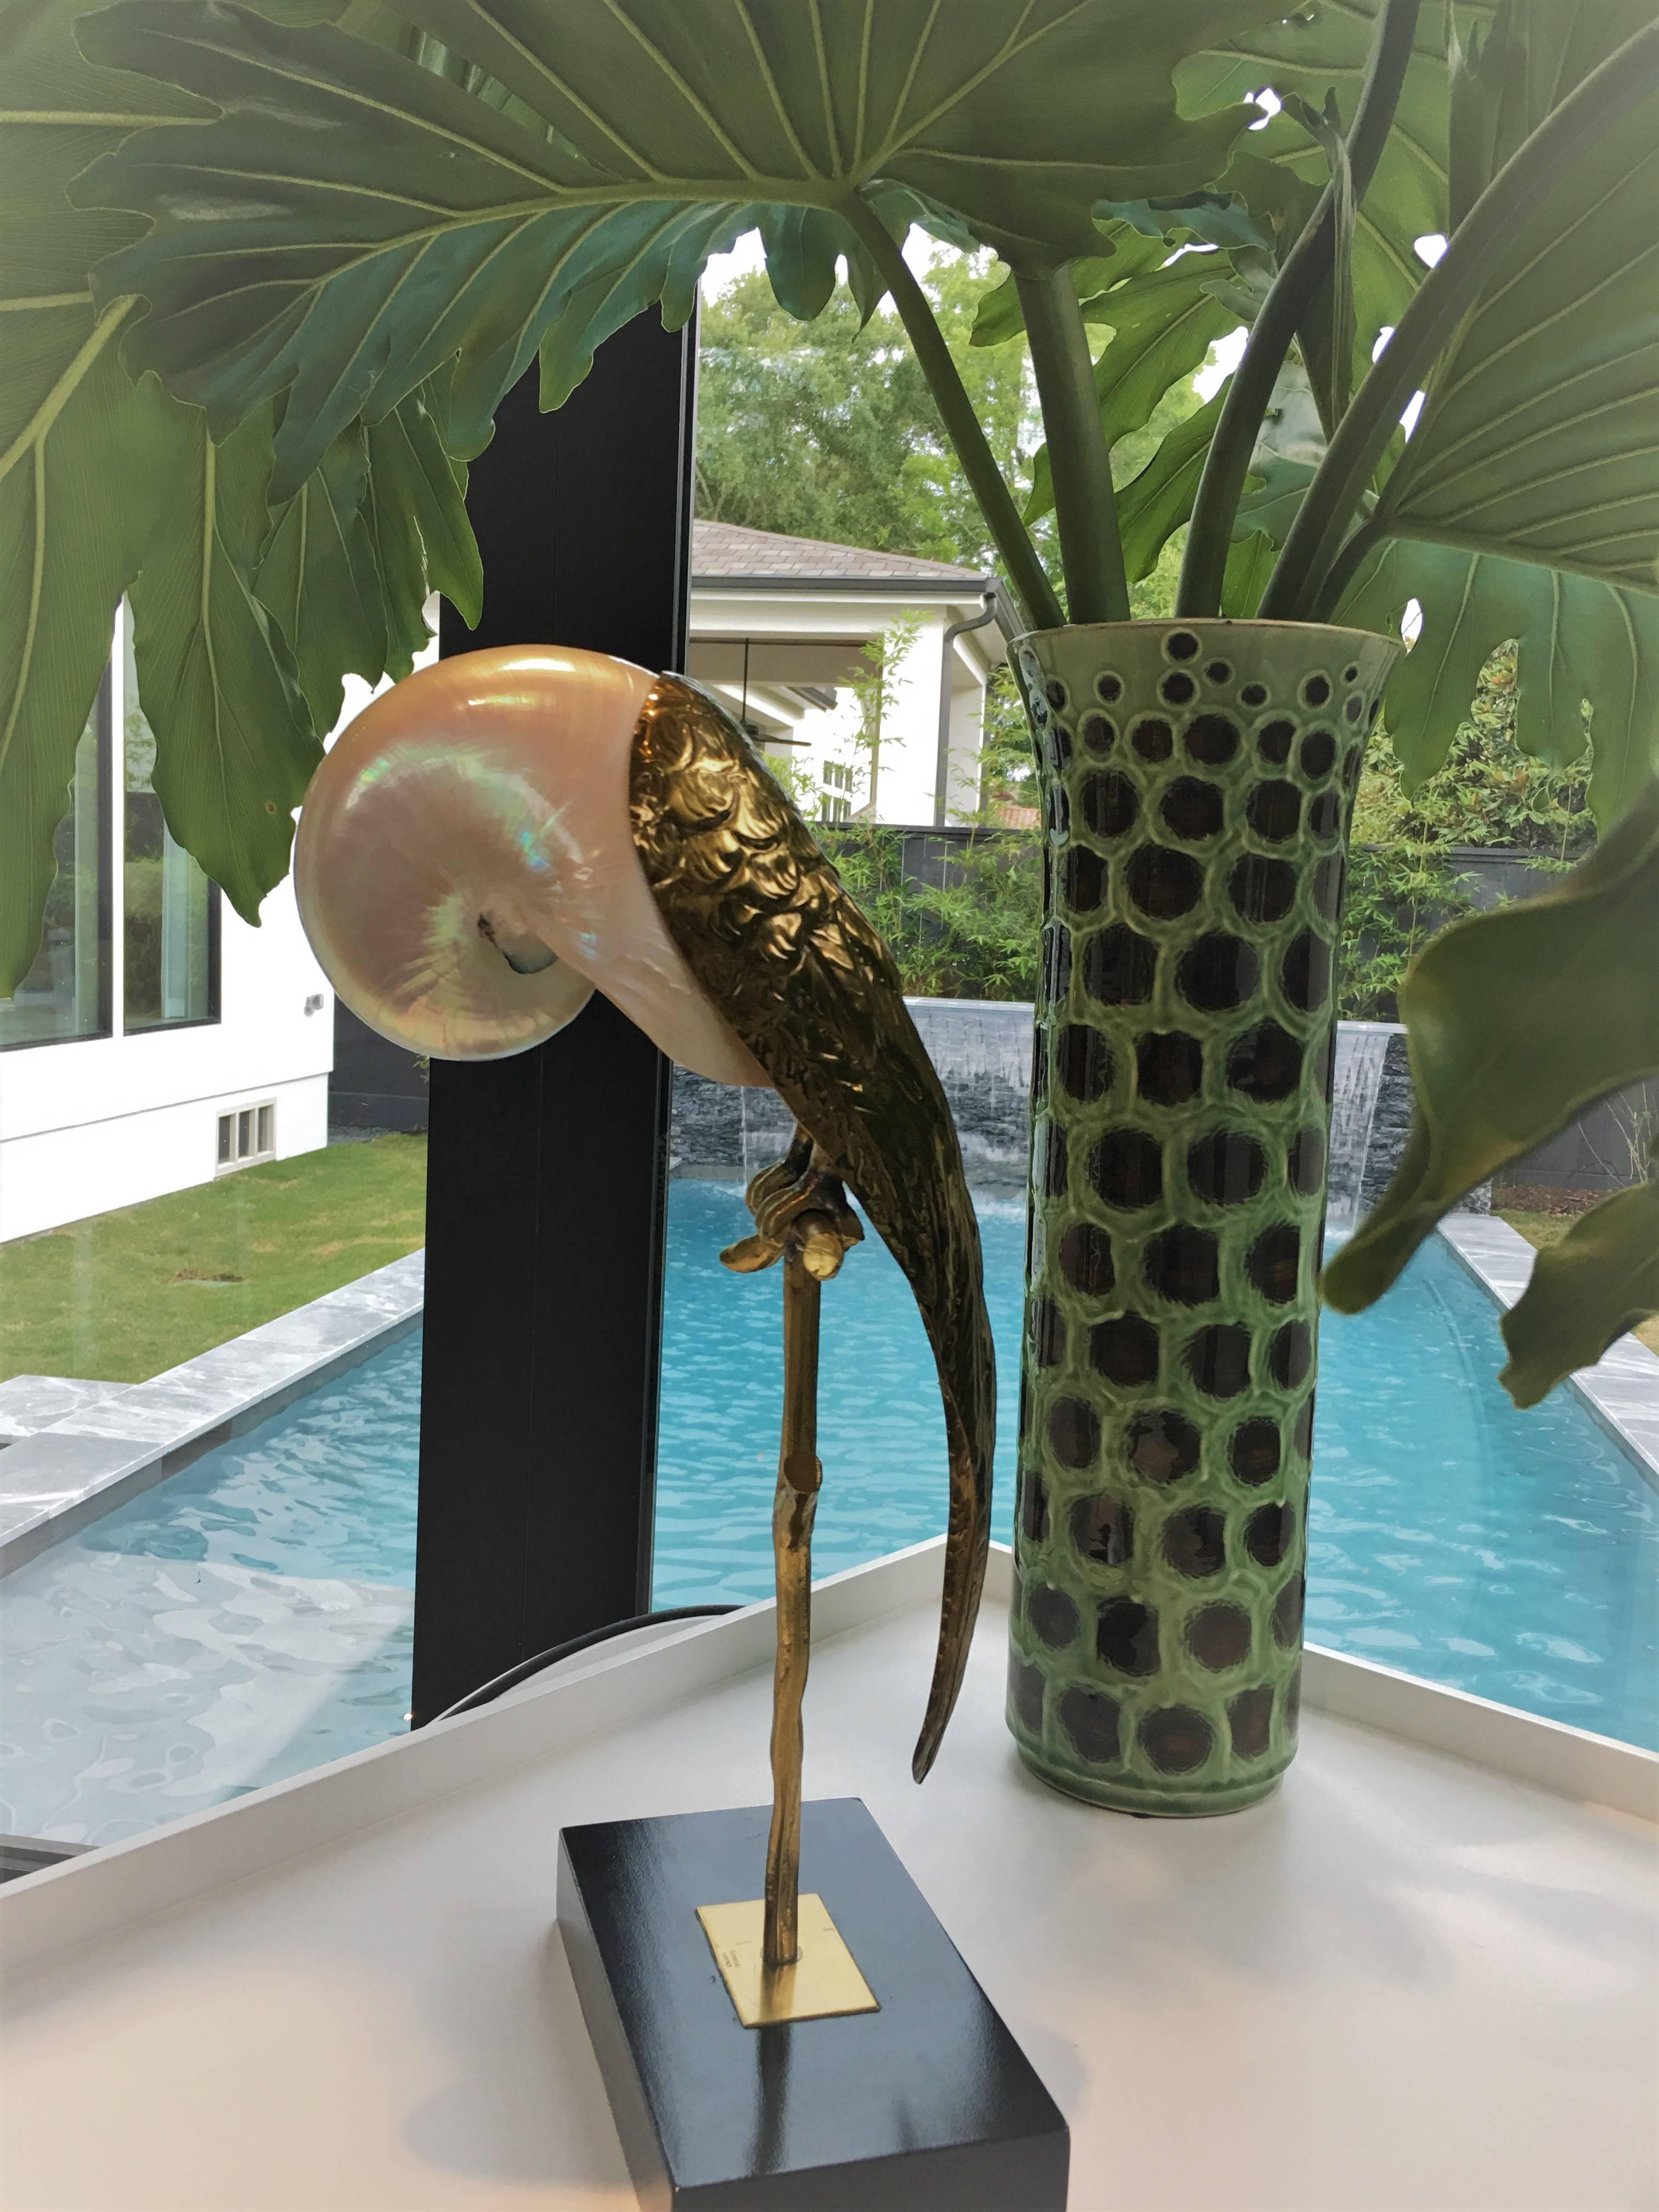 Whimsical Mid-Century parrot sculpture crafted with brass and a gorgeous shell used here as the head. This is an unusual specimen for Binazzi, as the shells are typically used for the bodies of these fanciful creations. The size of this example is